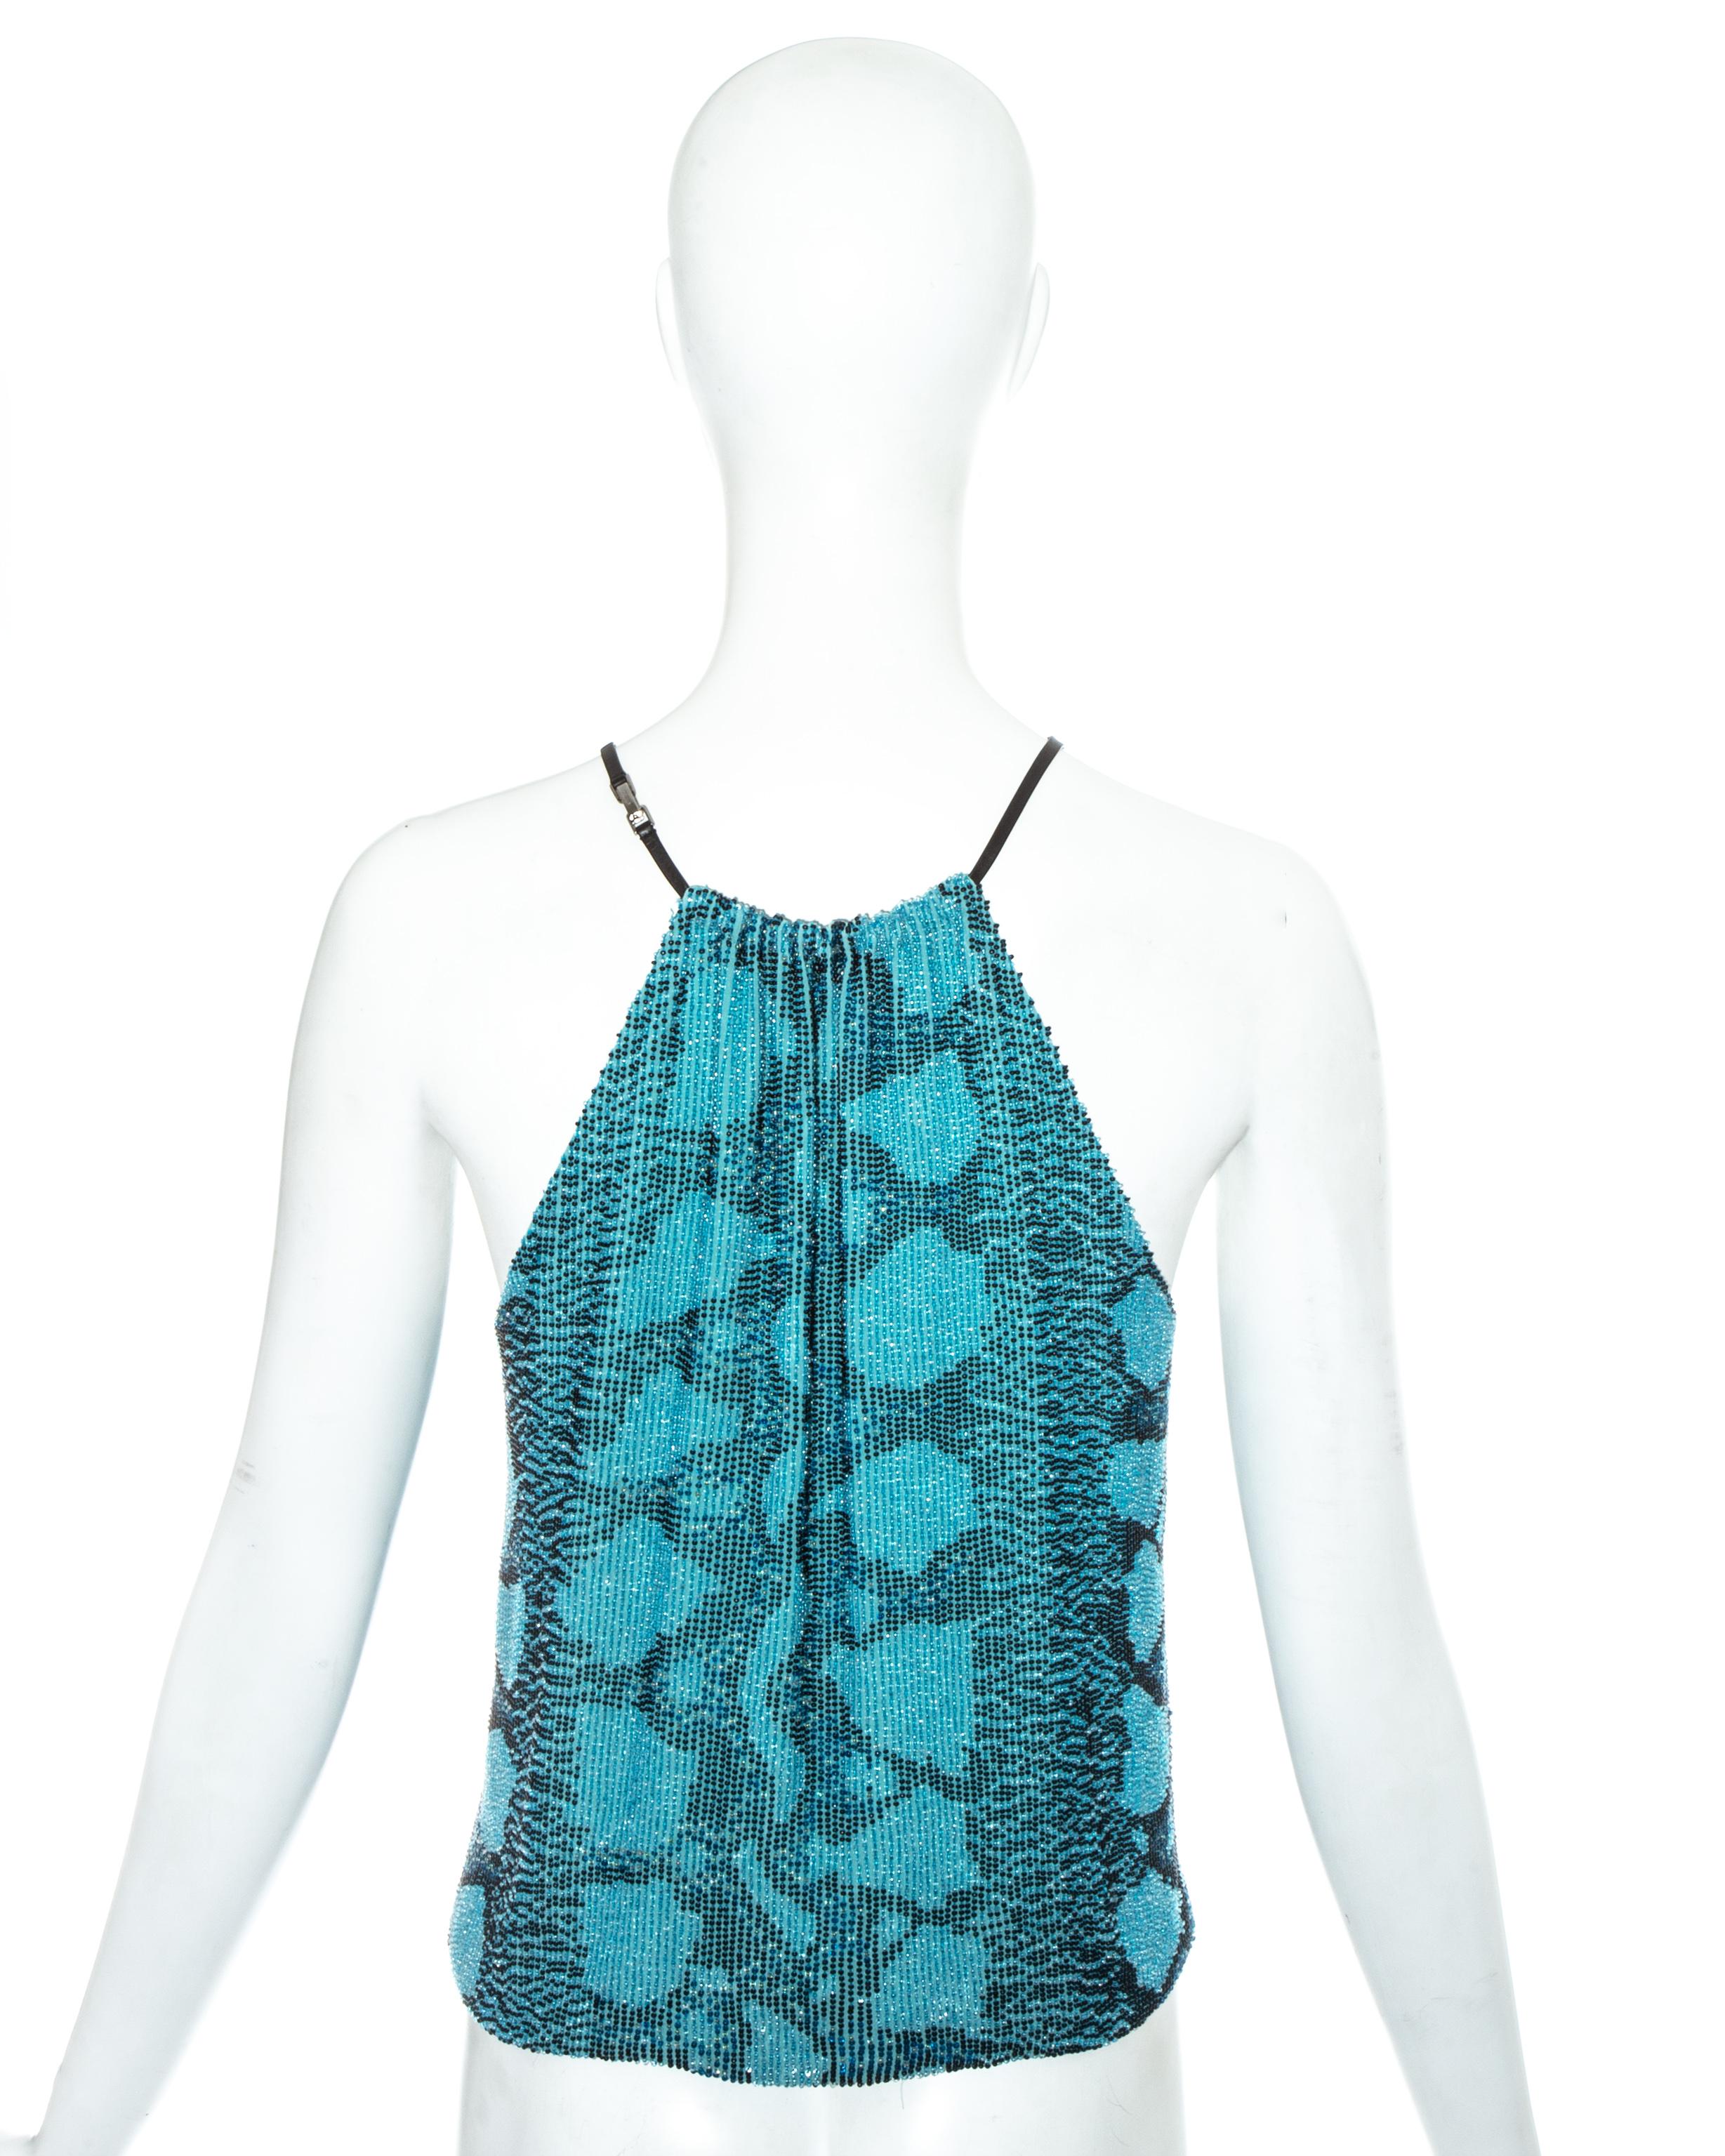 Blue Gucci by Tom Ford blue beaded snake print evening top, ss 2000 